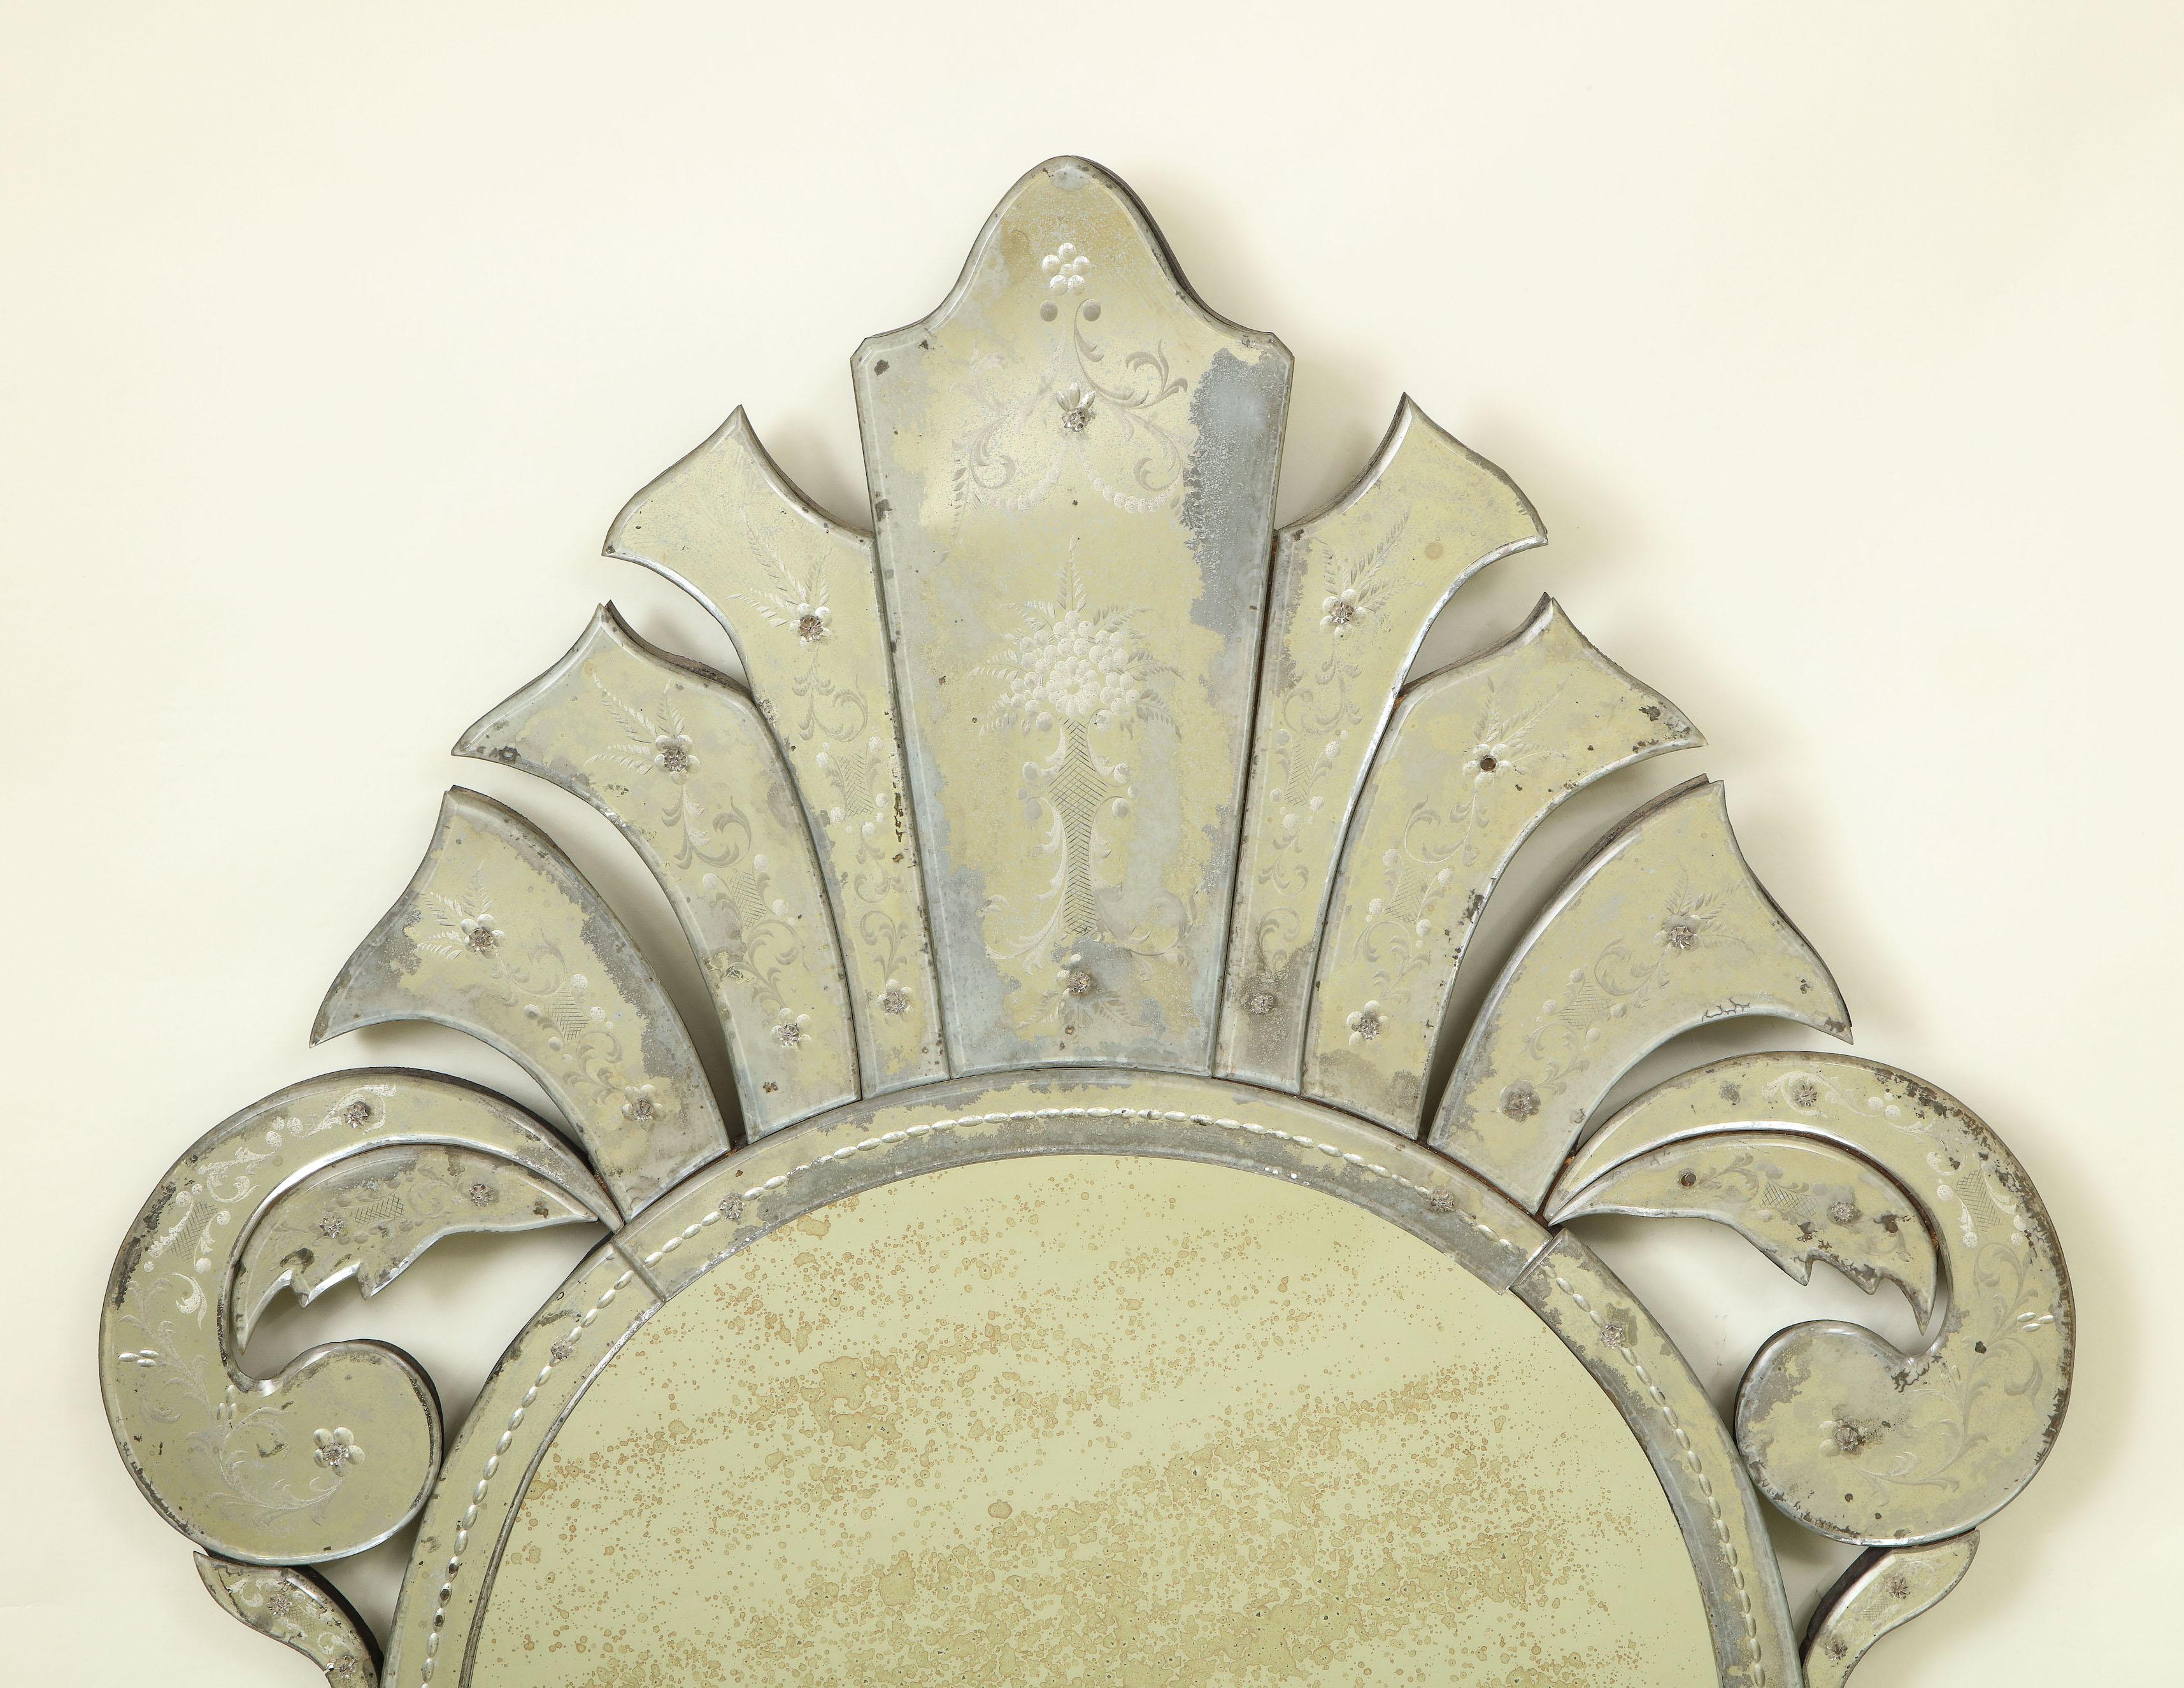 Impressive piece. The round central antiqued mirror plate with arched mirrored cresting and apron finely etched with foliate scrollwork with mirrored floral overlays.

Provenance: From the Collection of Mario Buatta, New York, NY.